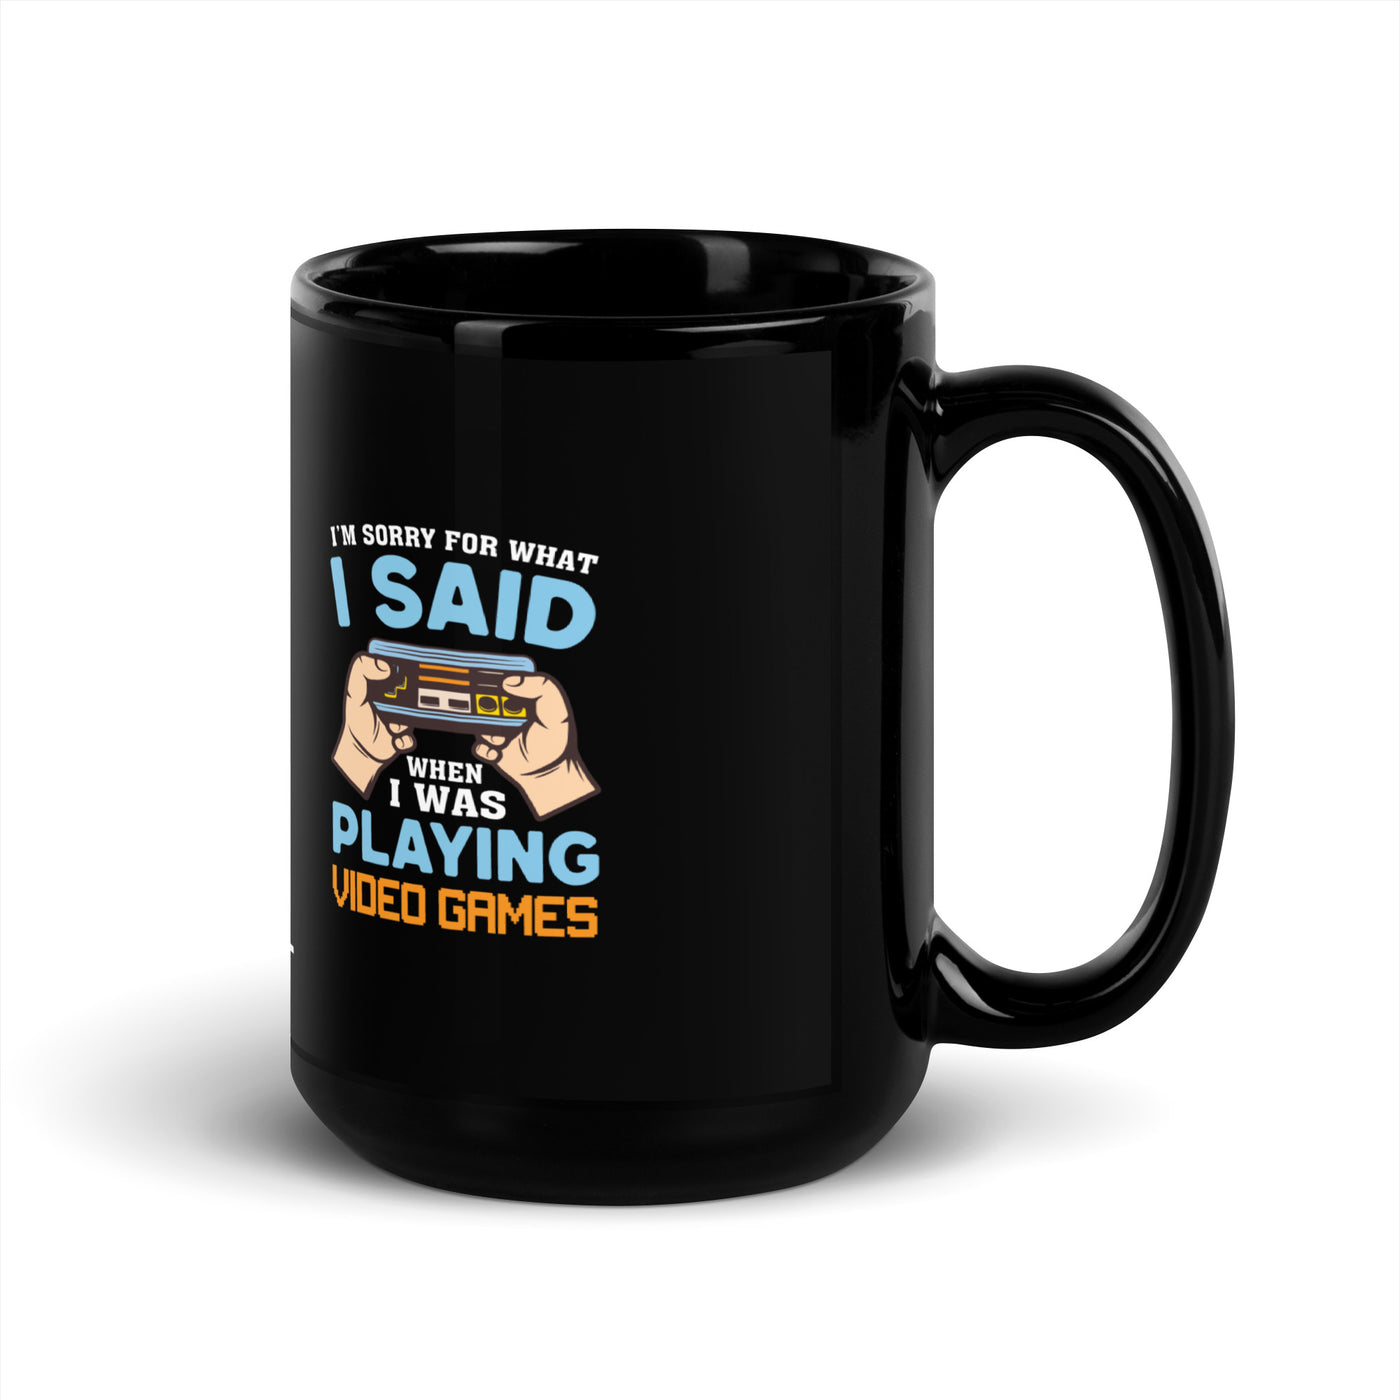 I'm sorry for what I Said, when I was playing Video Games - Black Glossy Mug